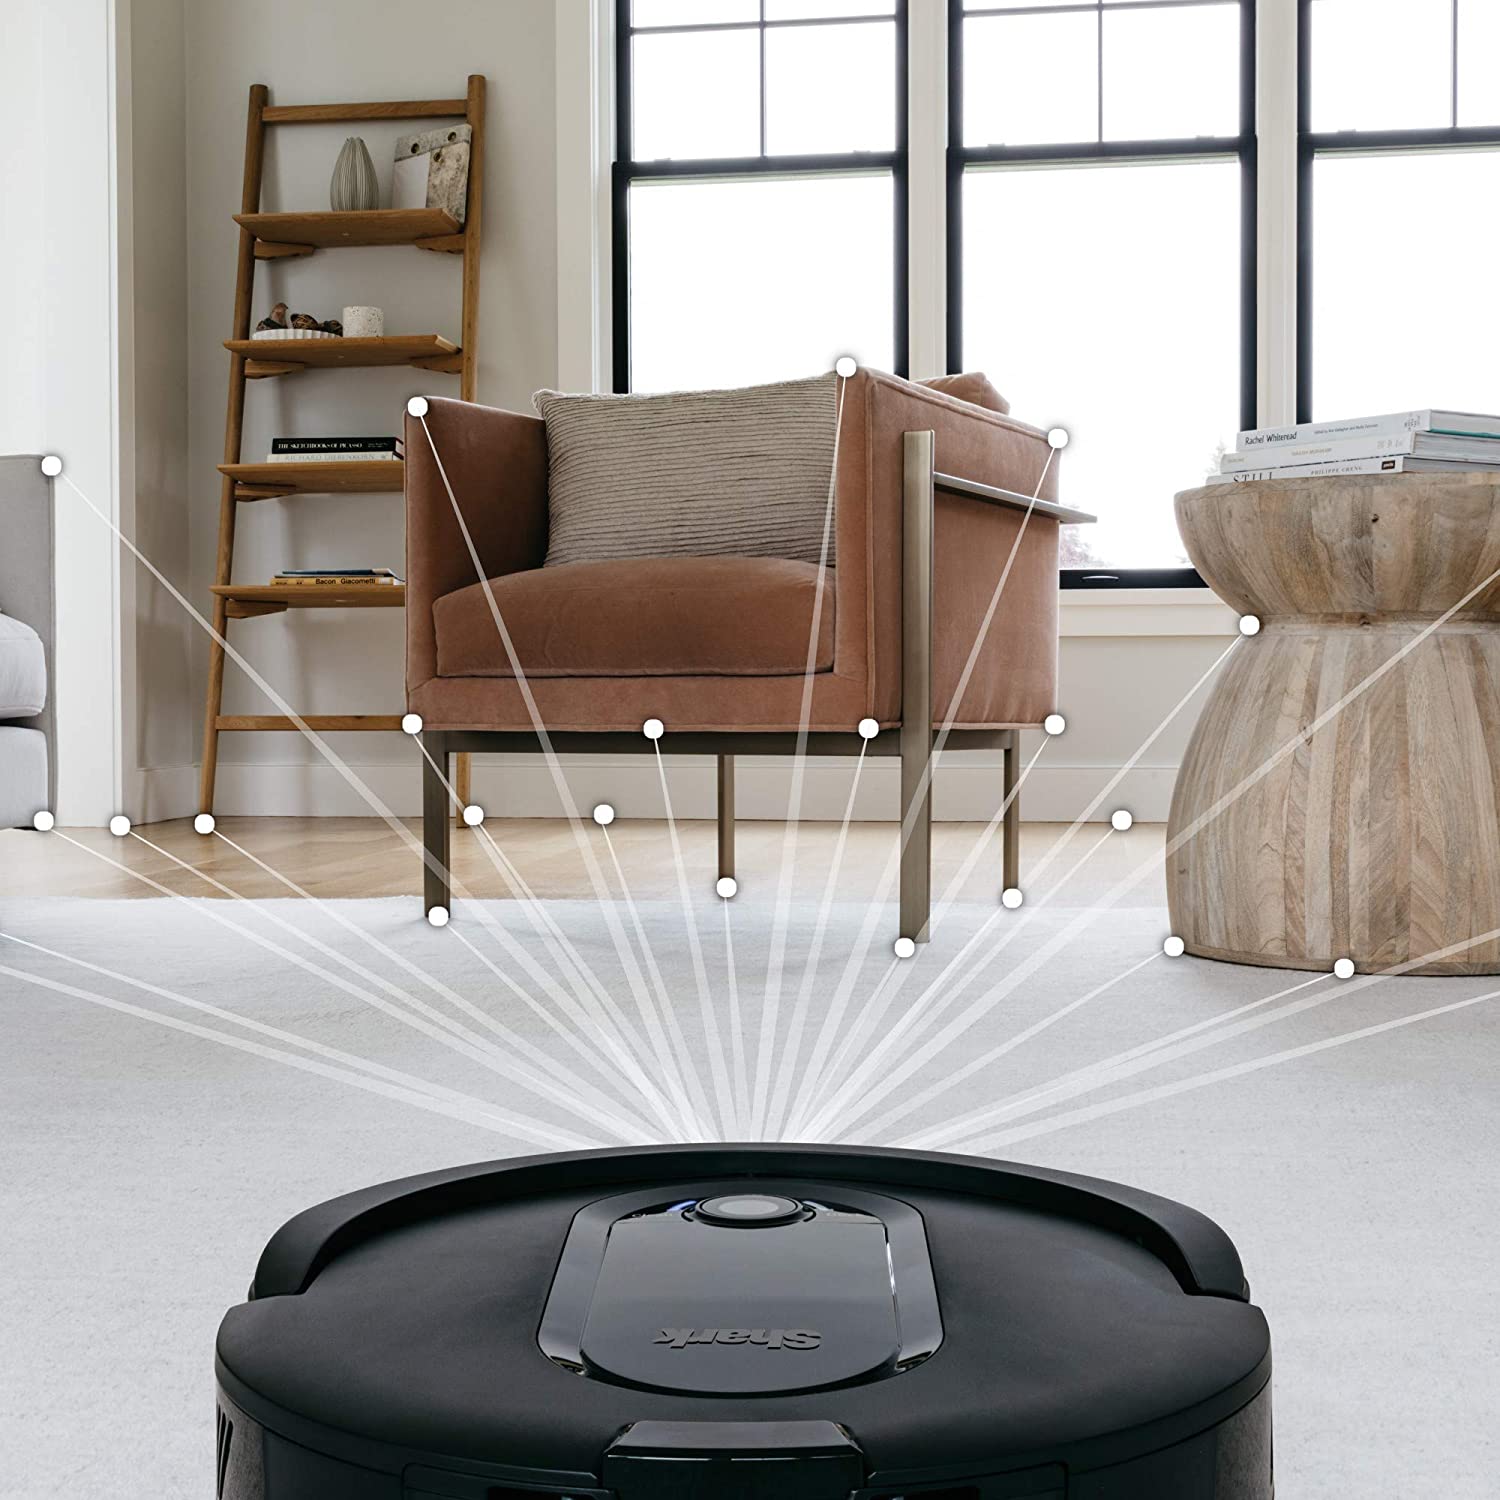 Restored Shark IQ Robot RV1100 AppControlled Robot Vacuum with Wifi and Home Mapping, Pet Hair Strong Suction with Alexa (Refurbished) - image 7 of 9